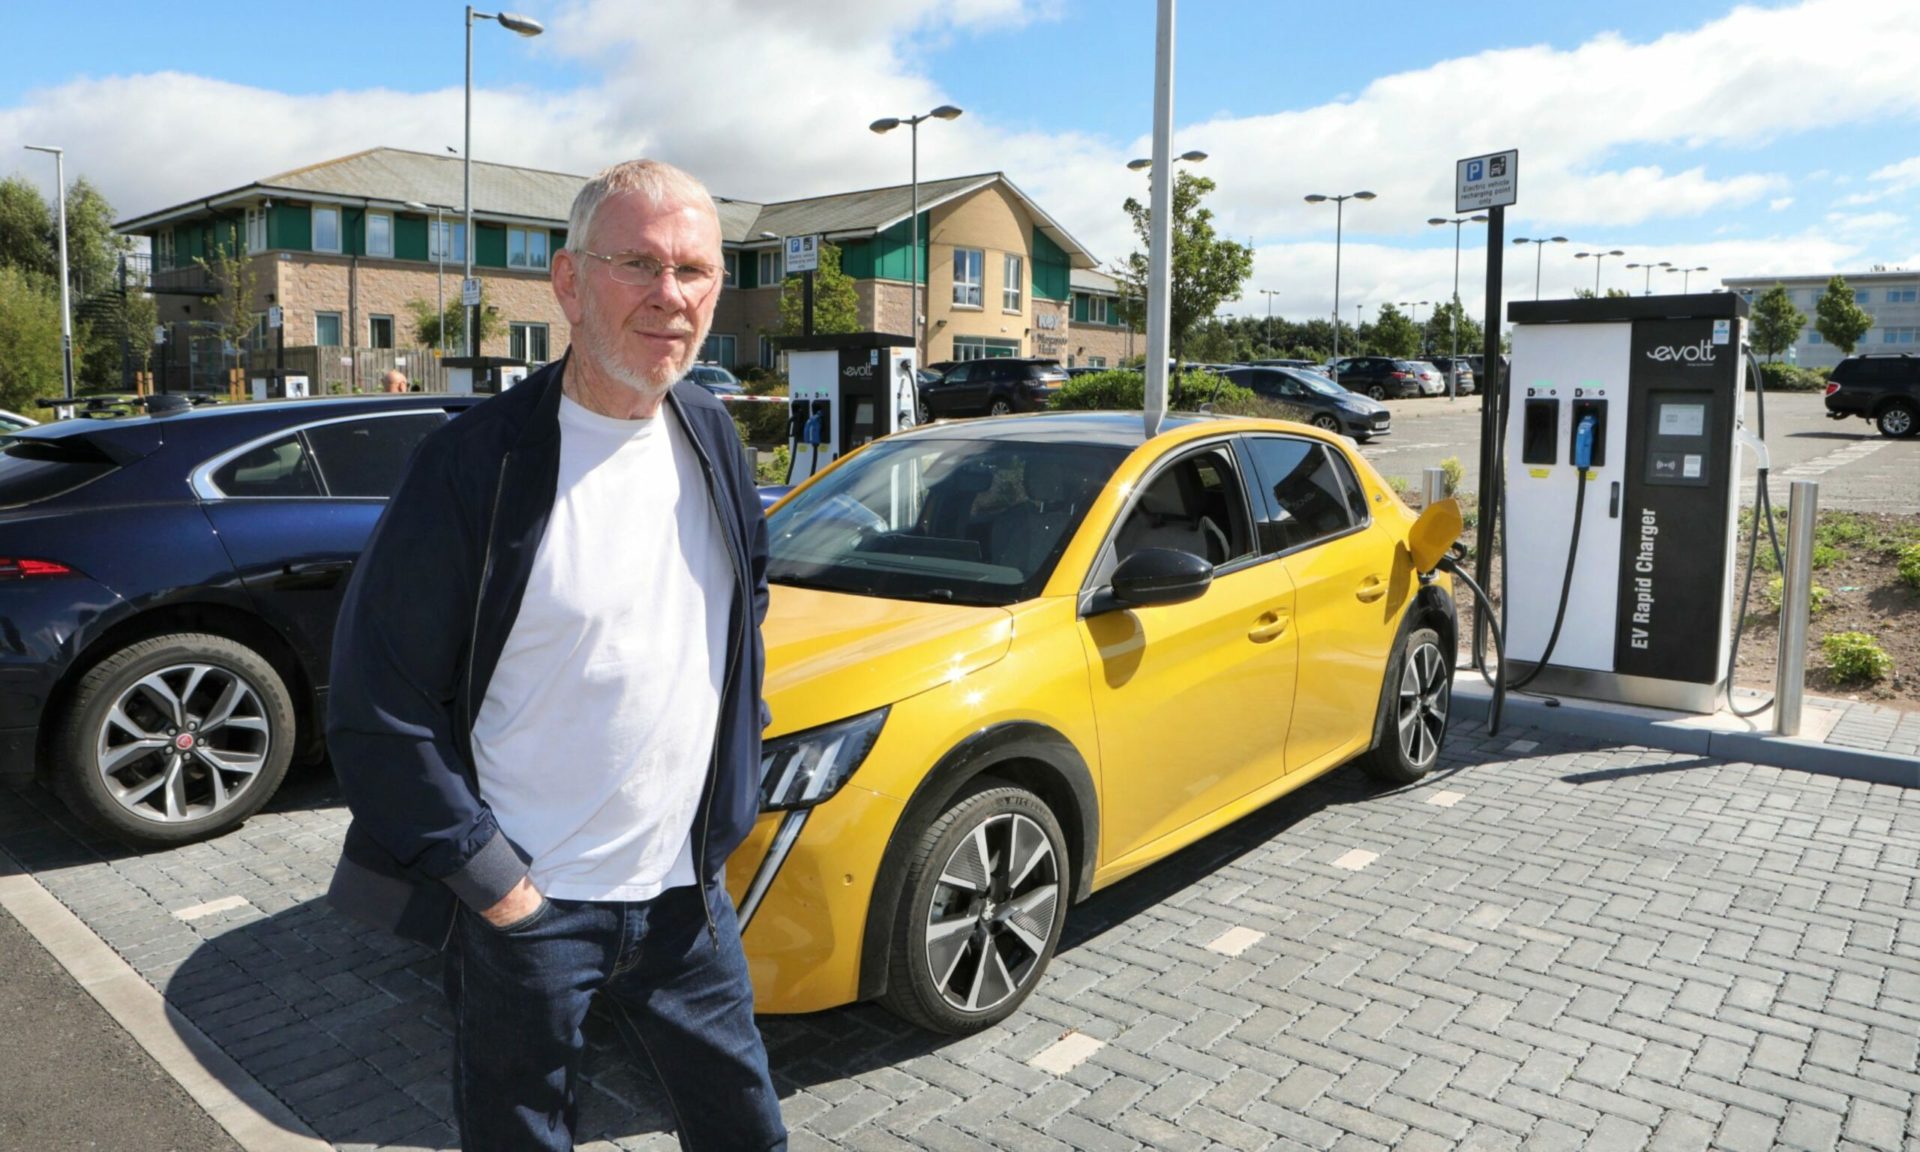 Dundee visitors to pay more as city electric car charging rates rocket